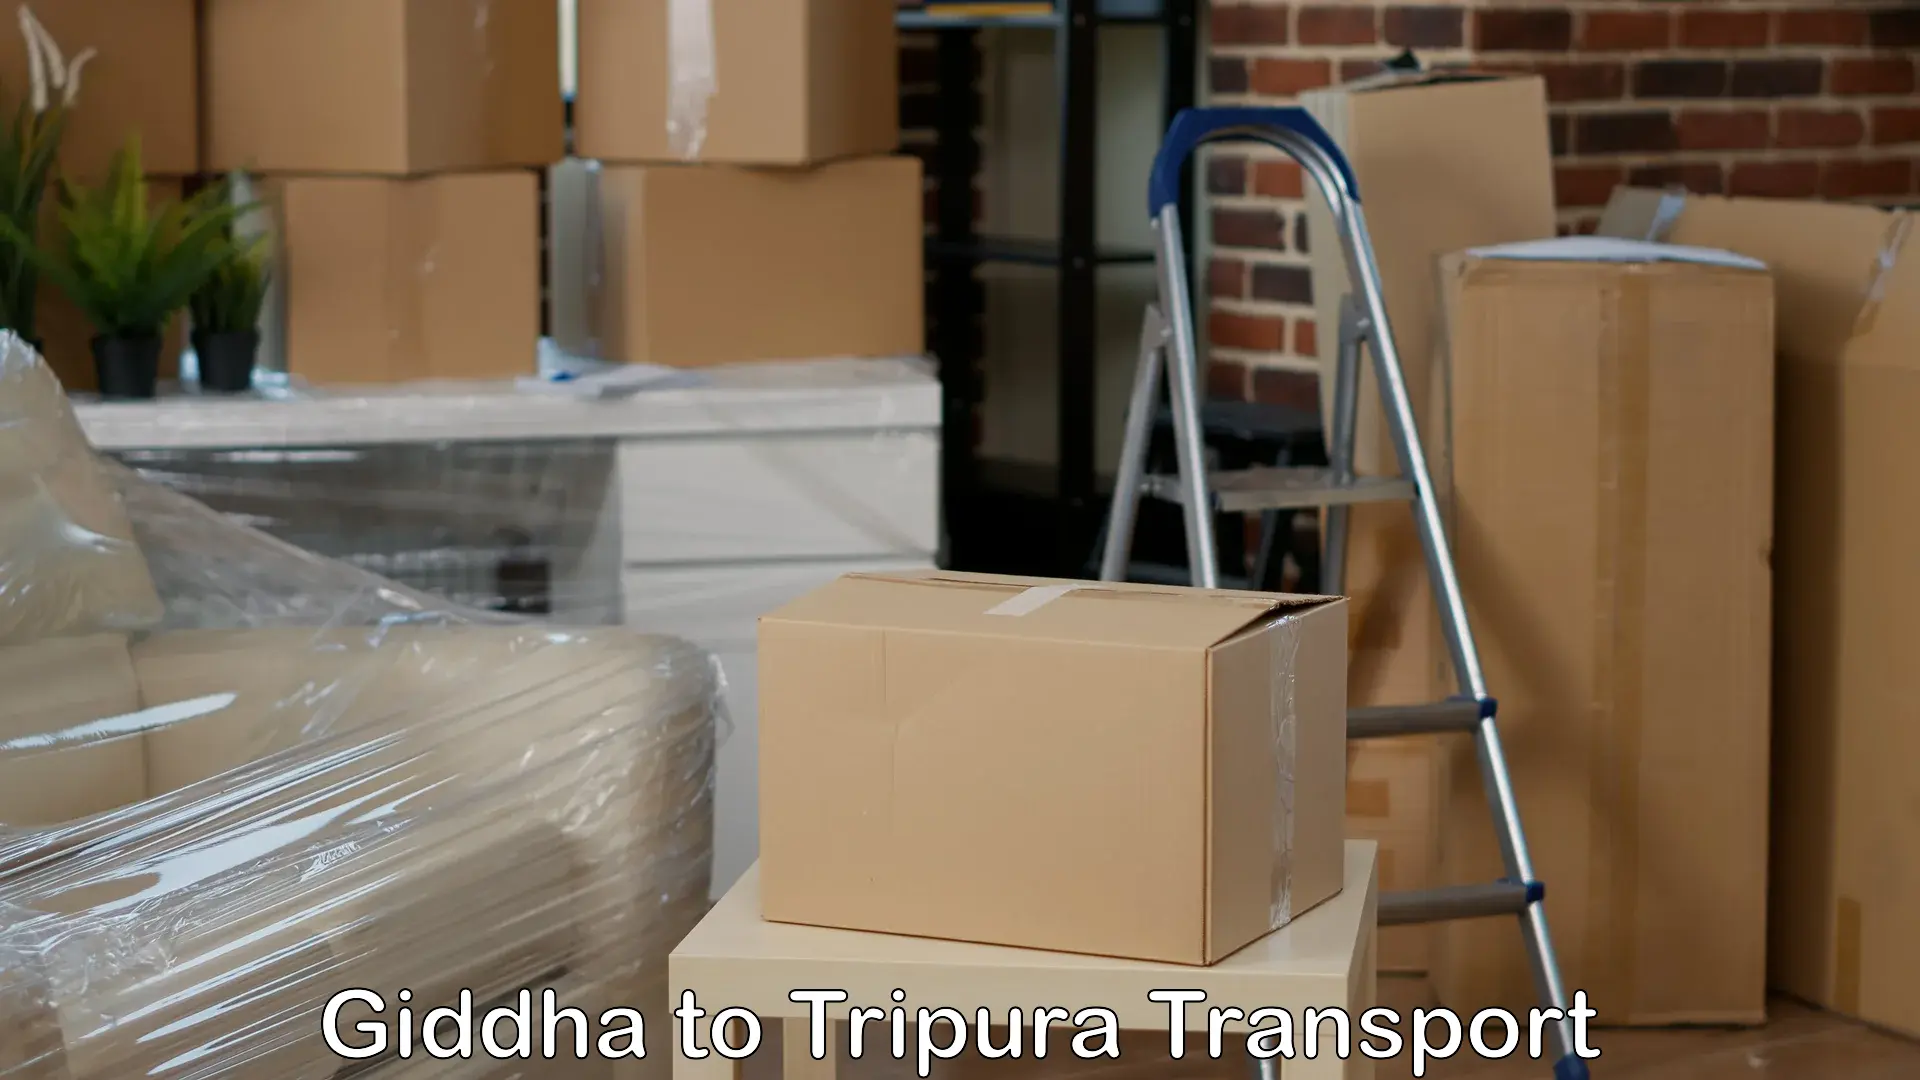 Delivery service Giddha to Tripura